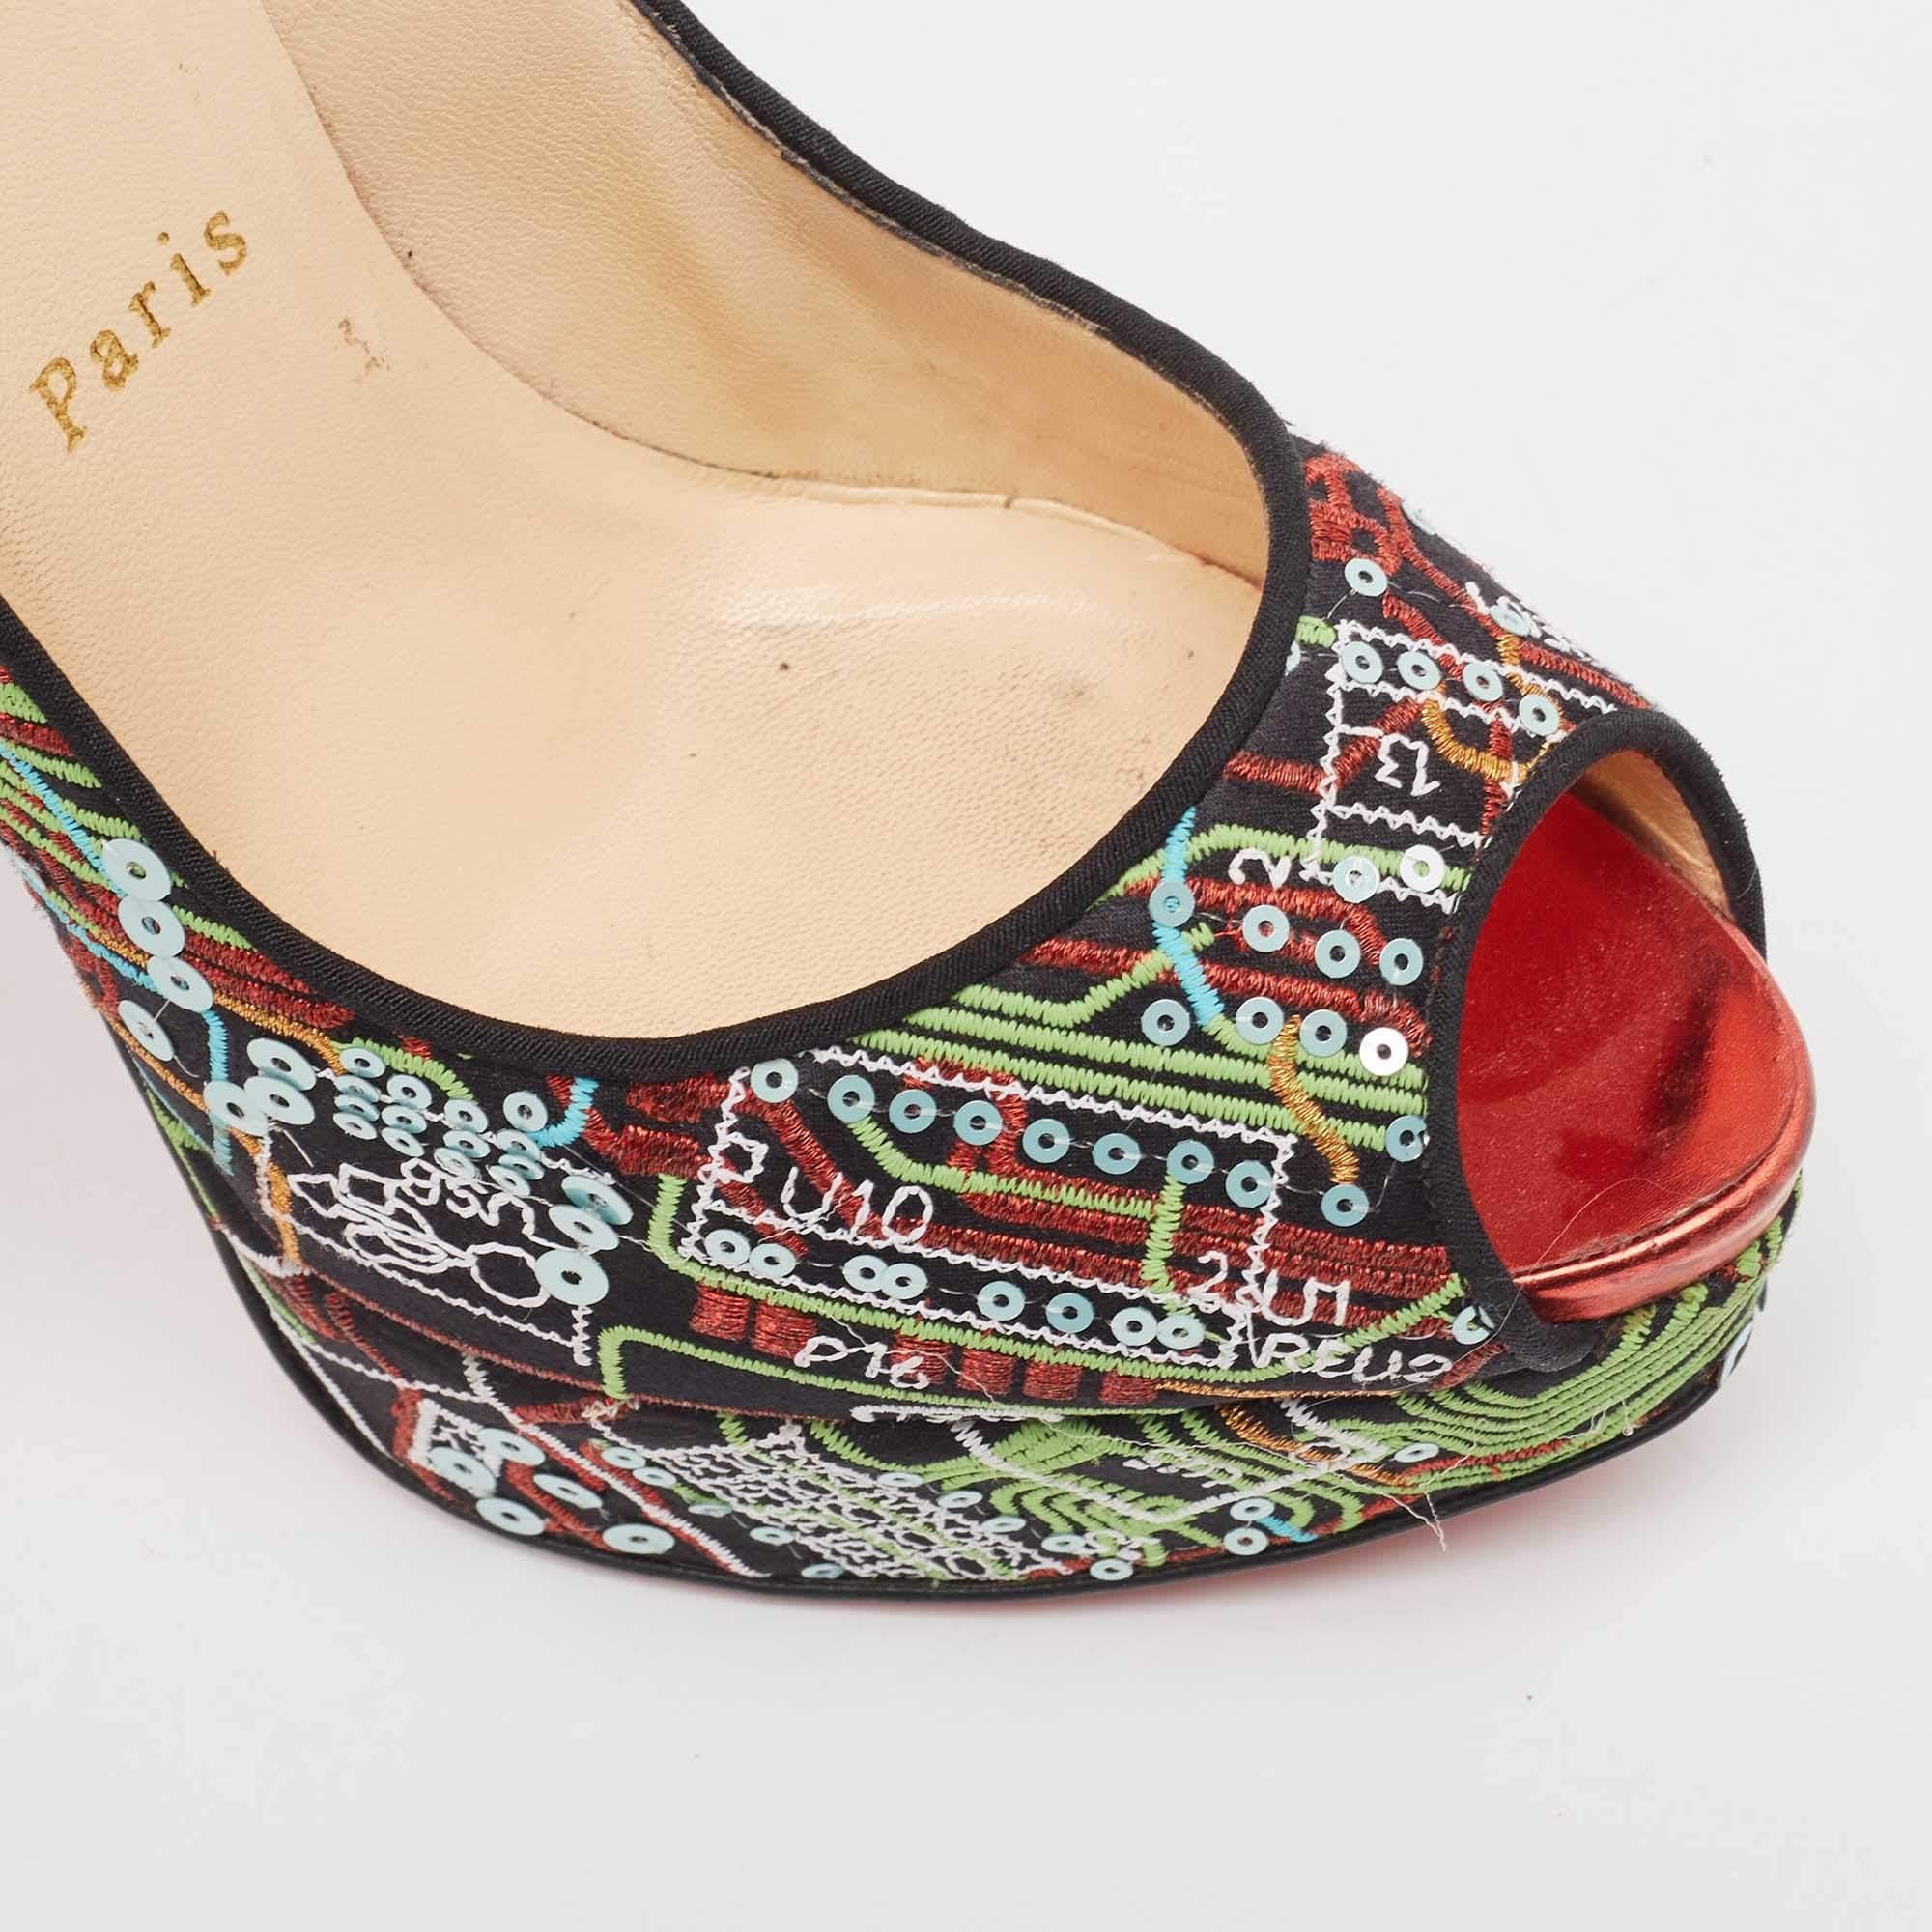 Christian Louboutin Satin and Sequin Embellishments Lady Peep Toe Pumps Size For Sale 3